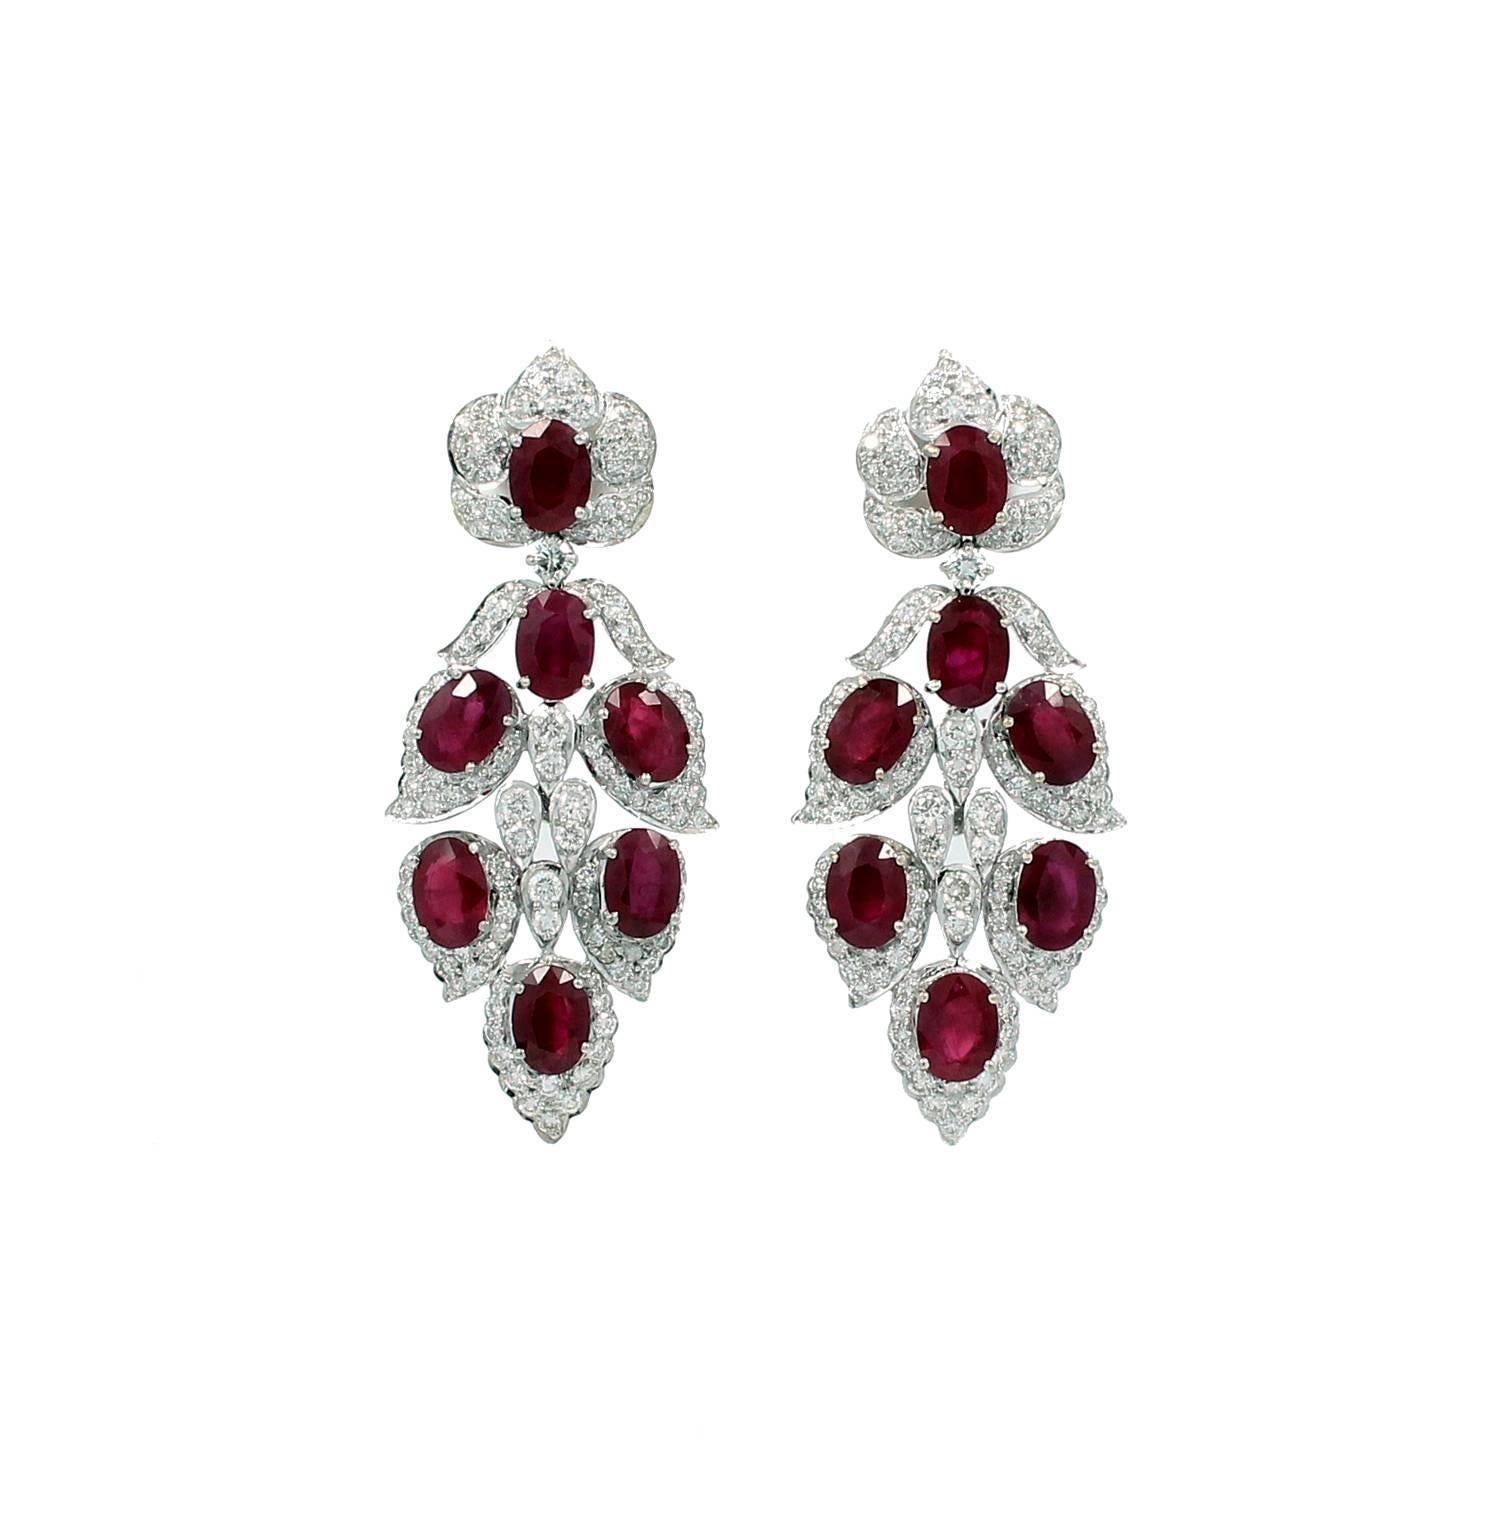 18K White Gold Earrings with 14 Oval Burma Rubies which equal 14.92 carats and Round Brilliant Diamonds which equal a total of 3.30 carats total weight. The earrings are 2 inches long and have a post with monster backs. Absolutely beautiful.